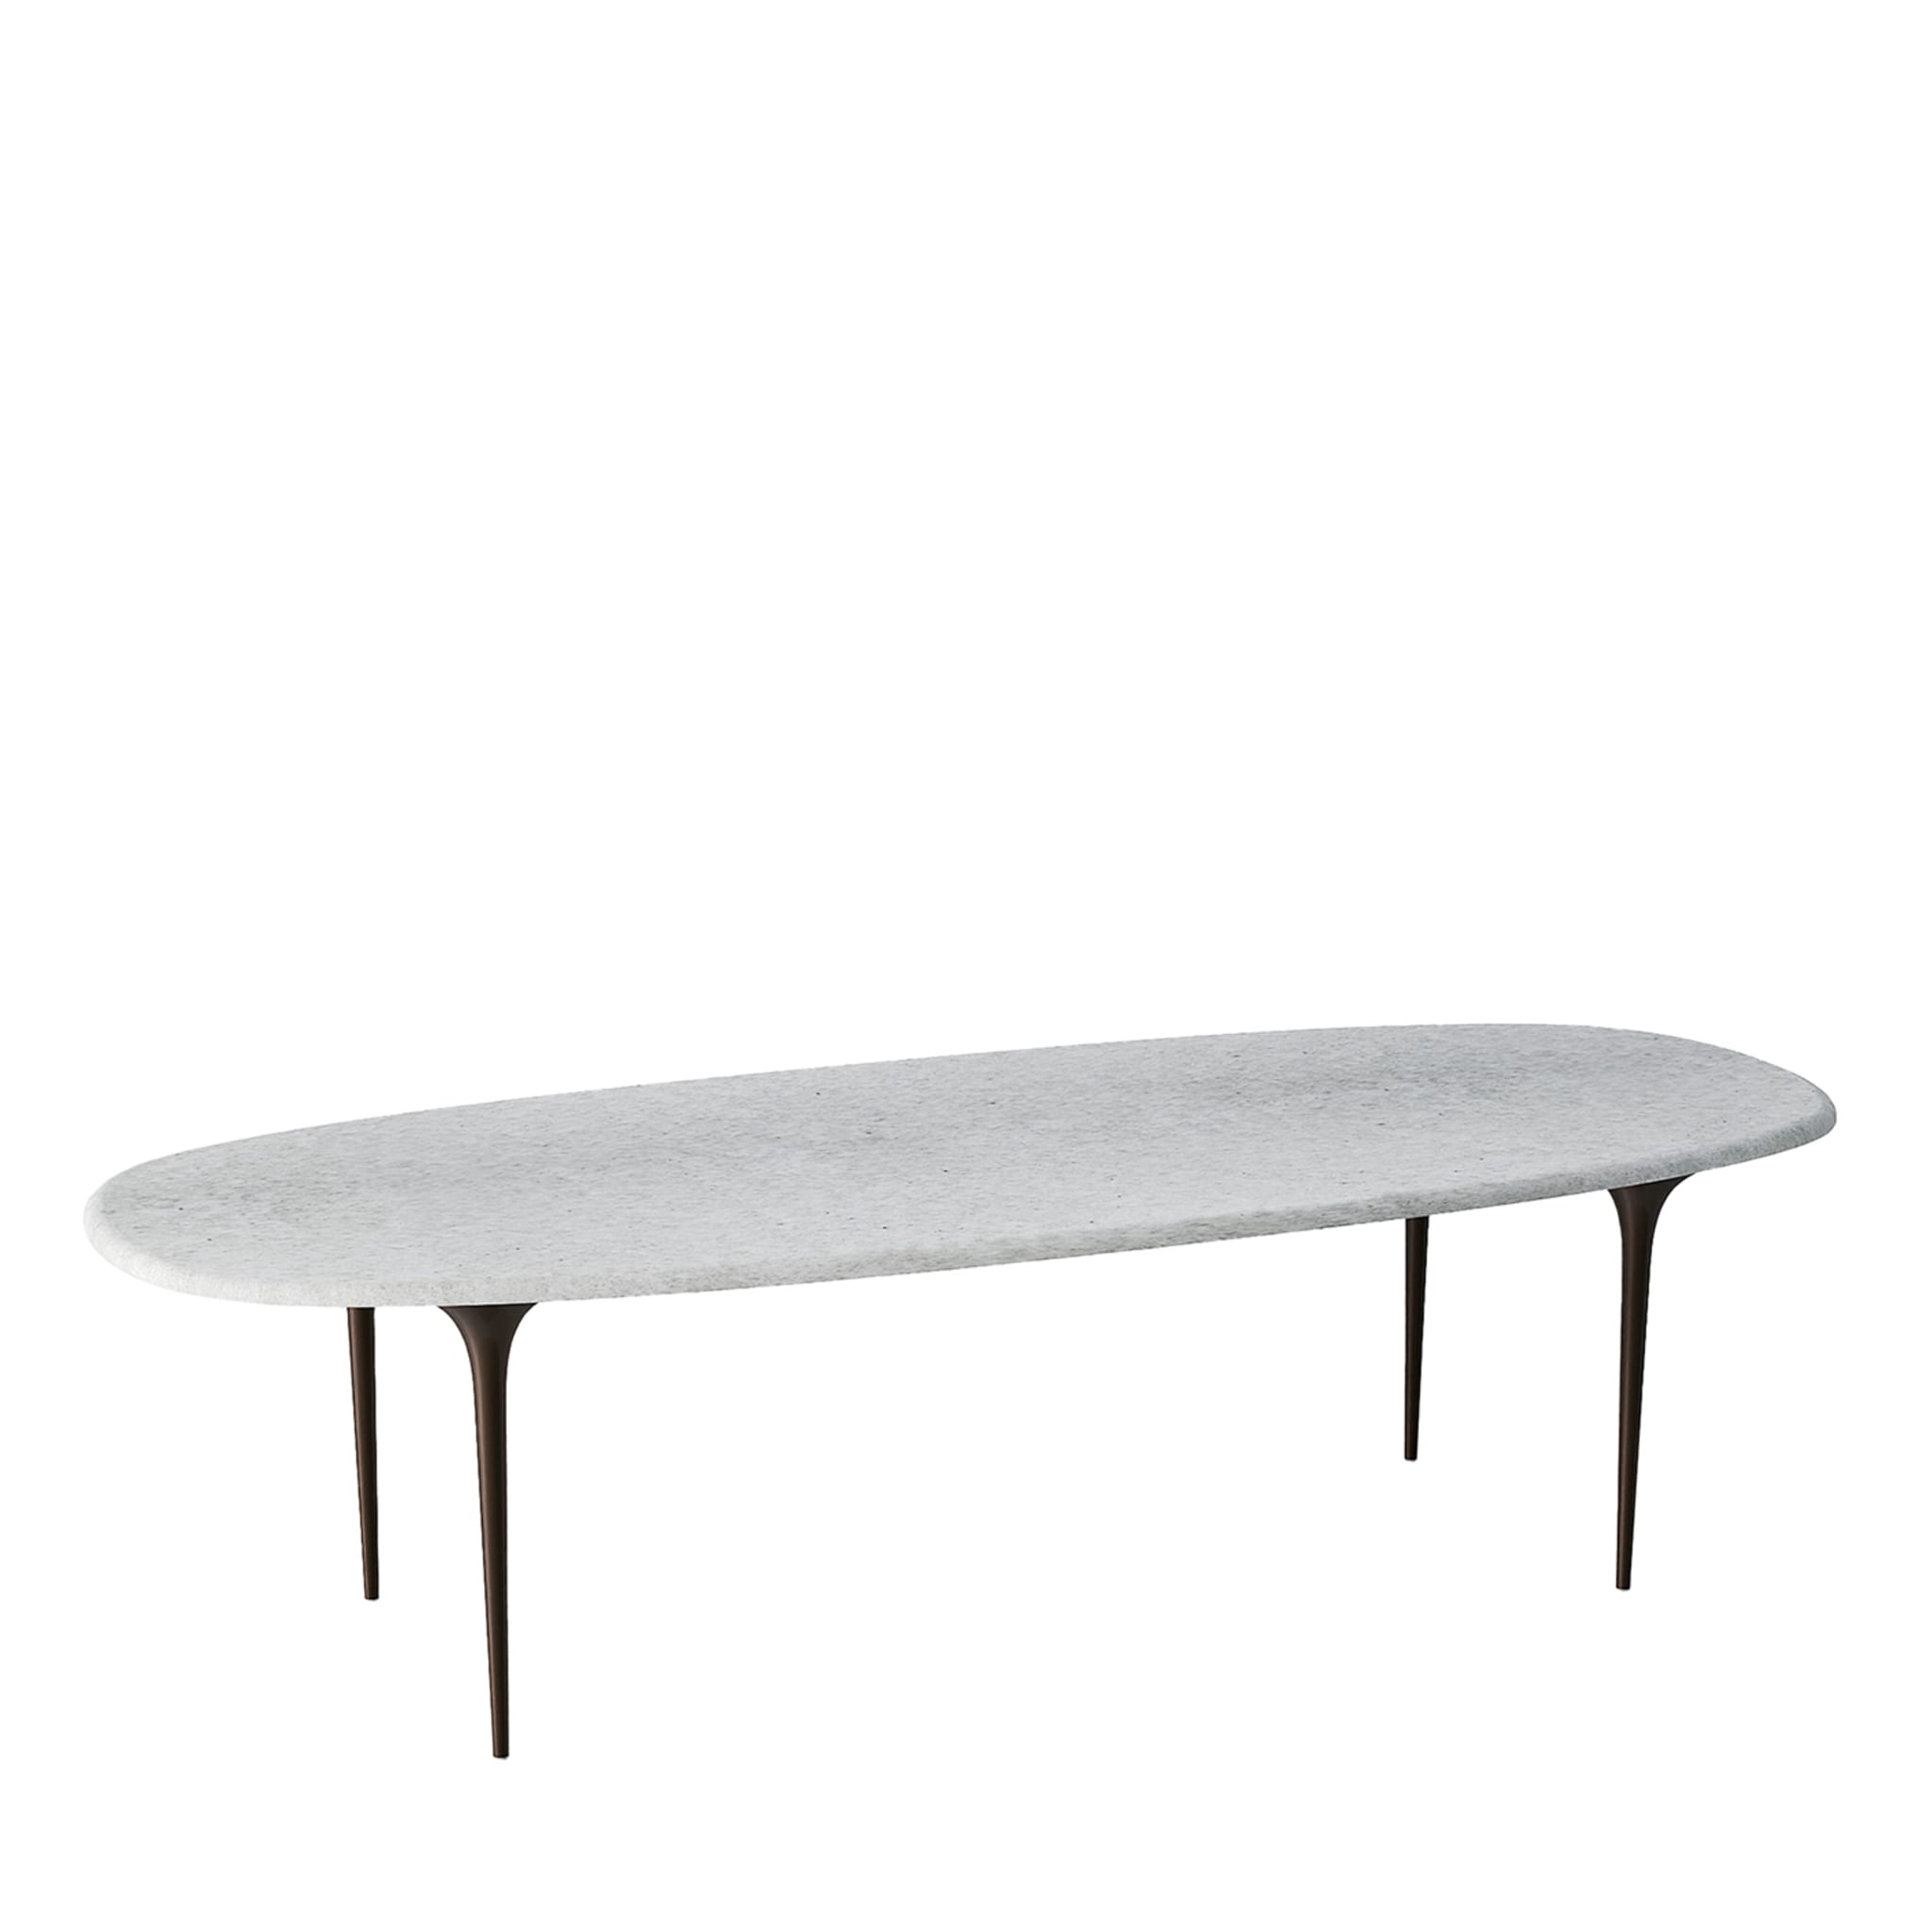 Organic 280 Oval Dining Table - Main view